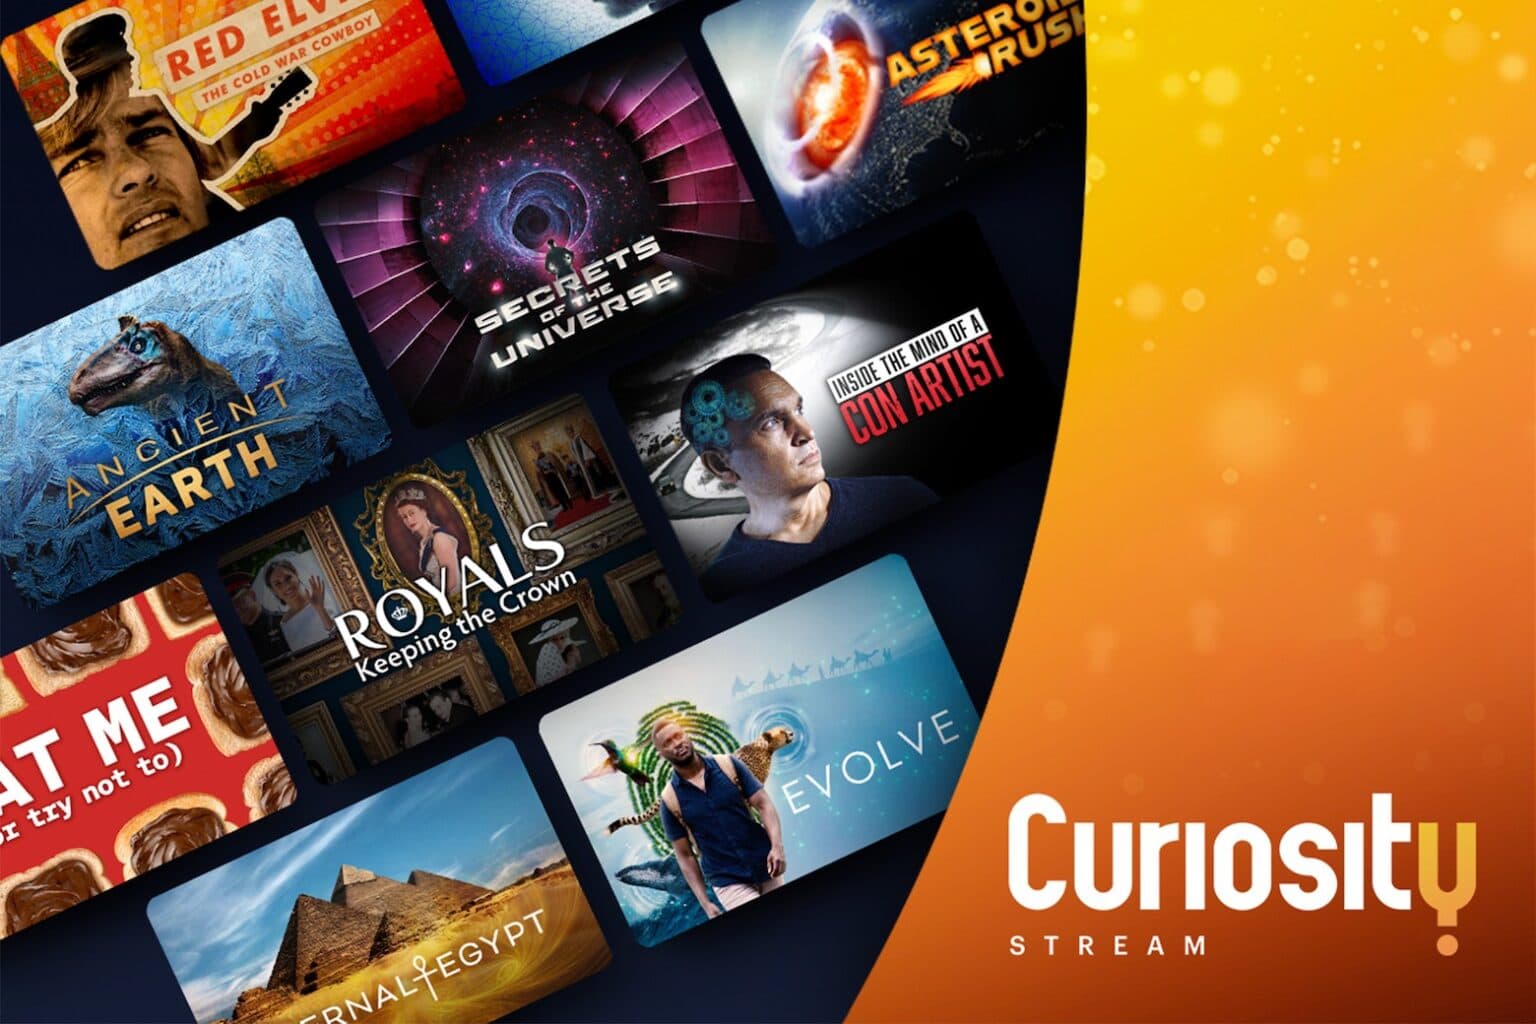 Food for your brain: Curiosity Stream, a documentary streaming channel, is now only $180.